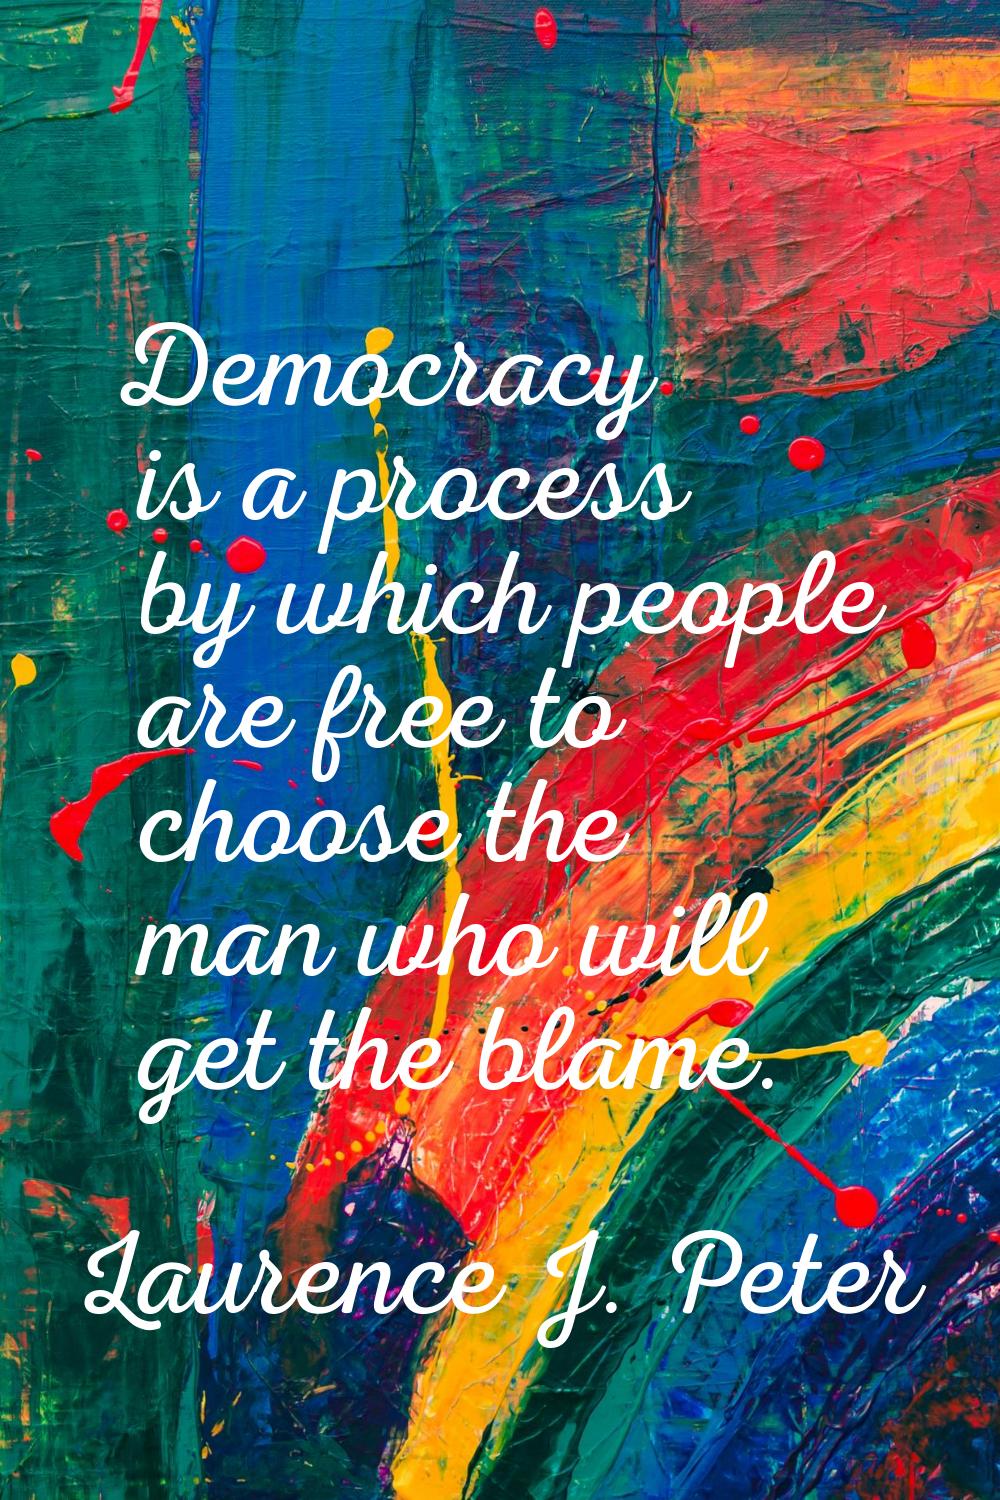 Democracy is a process by which people are free to choose the man who will get the blame.